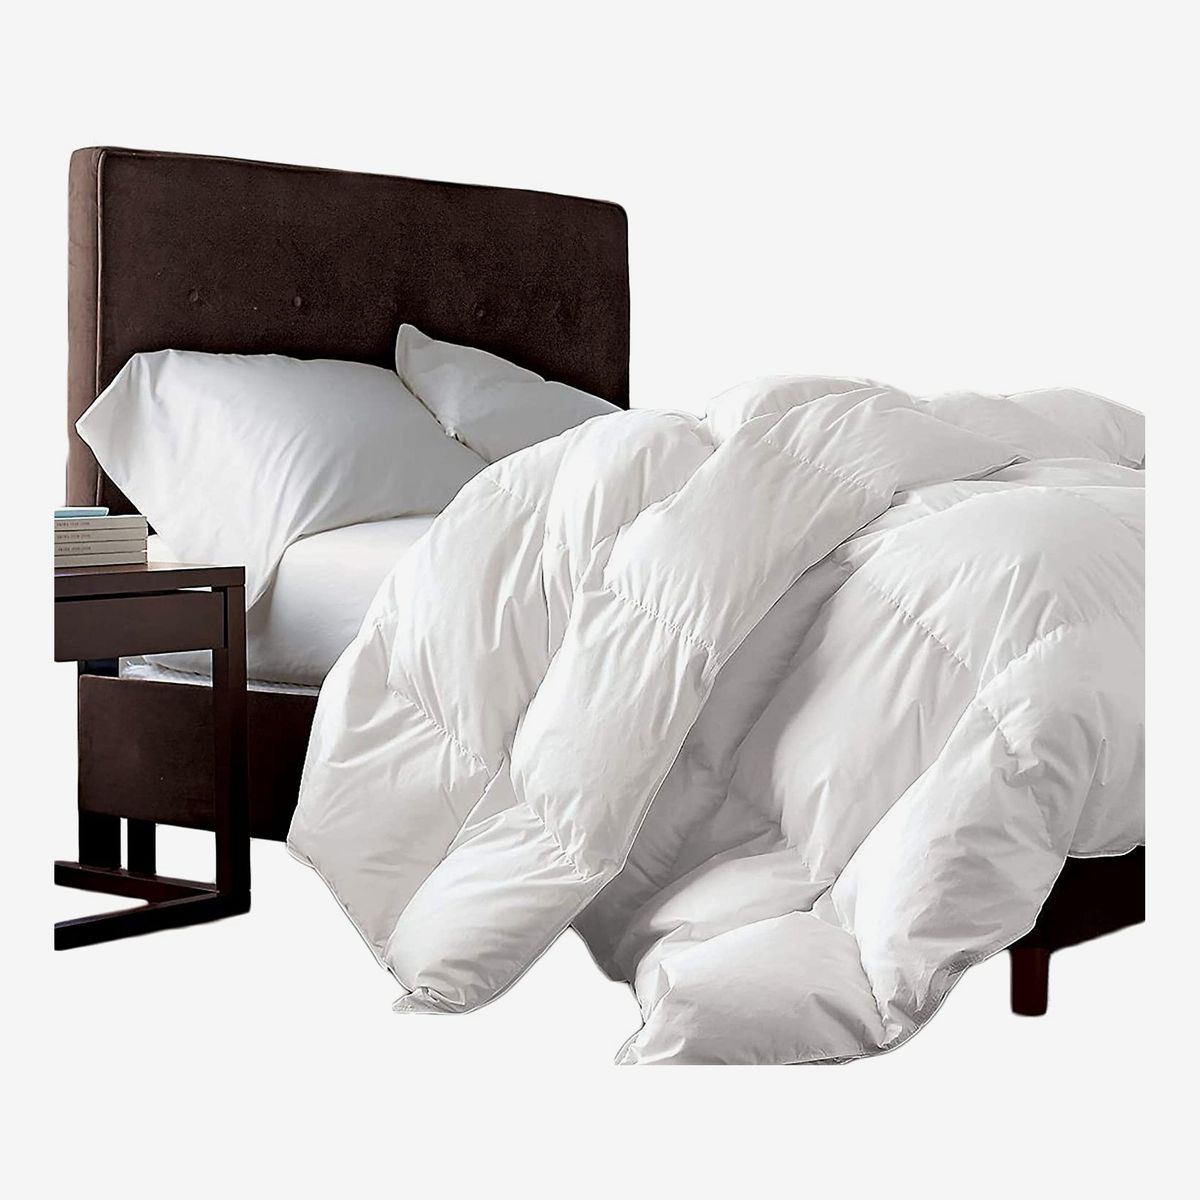 king size feather down comforter